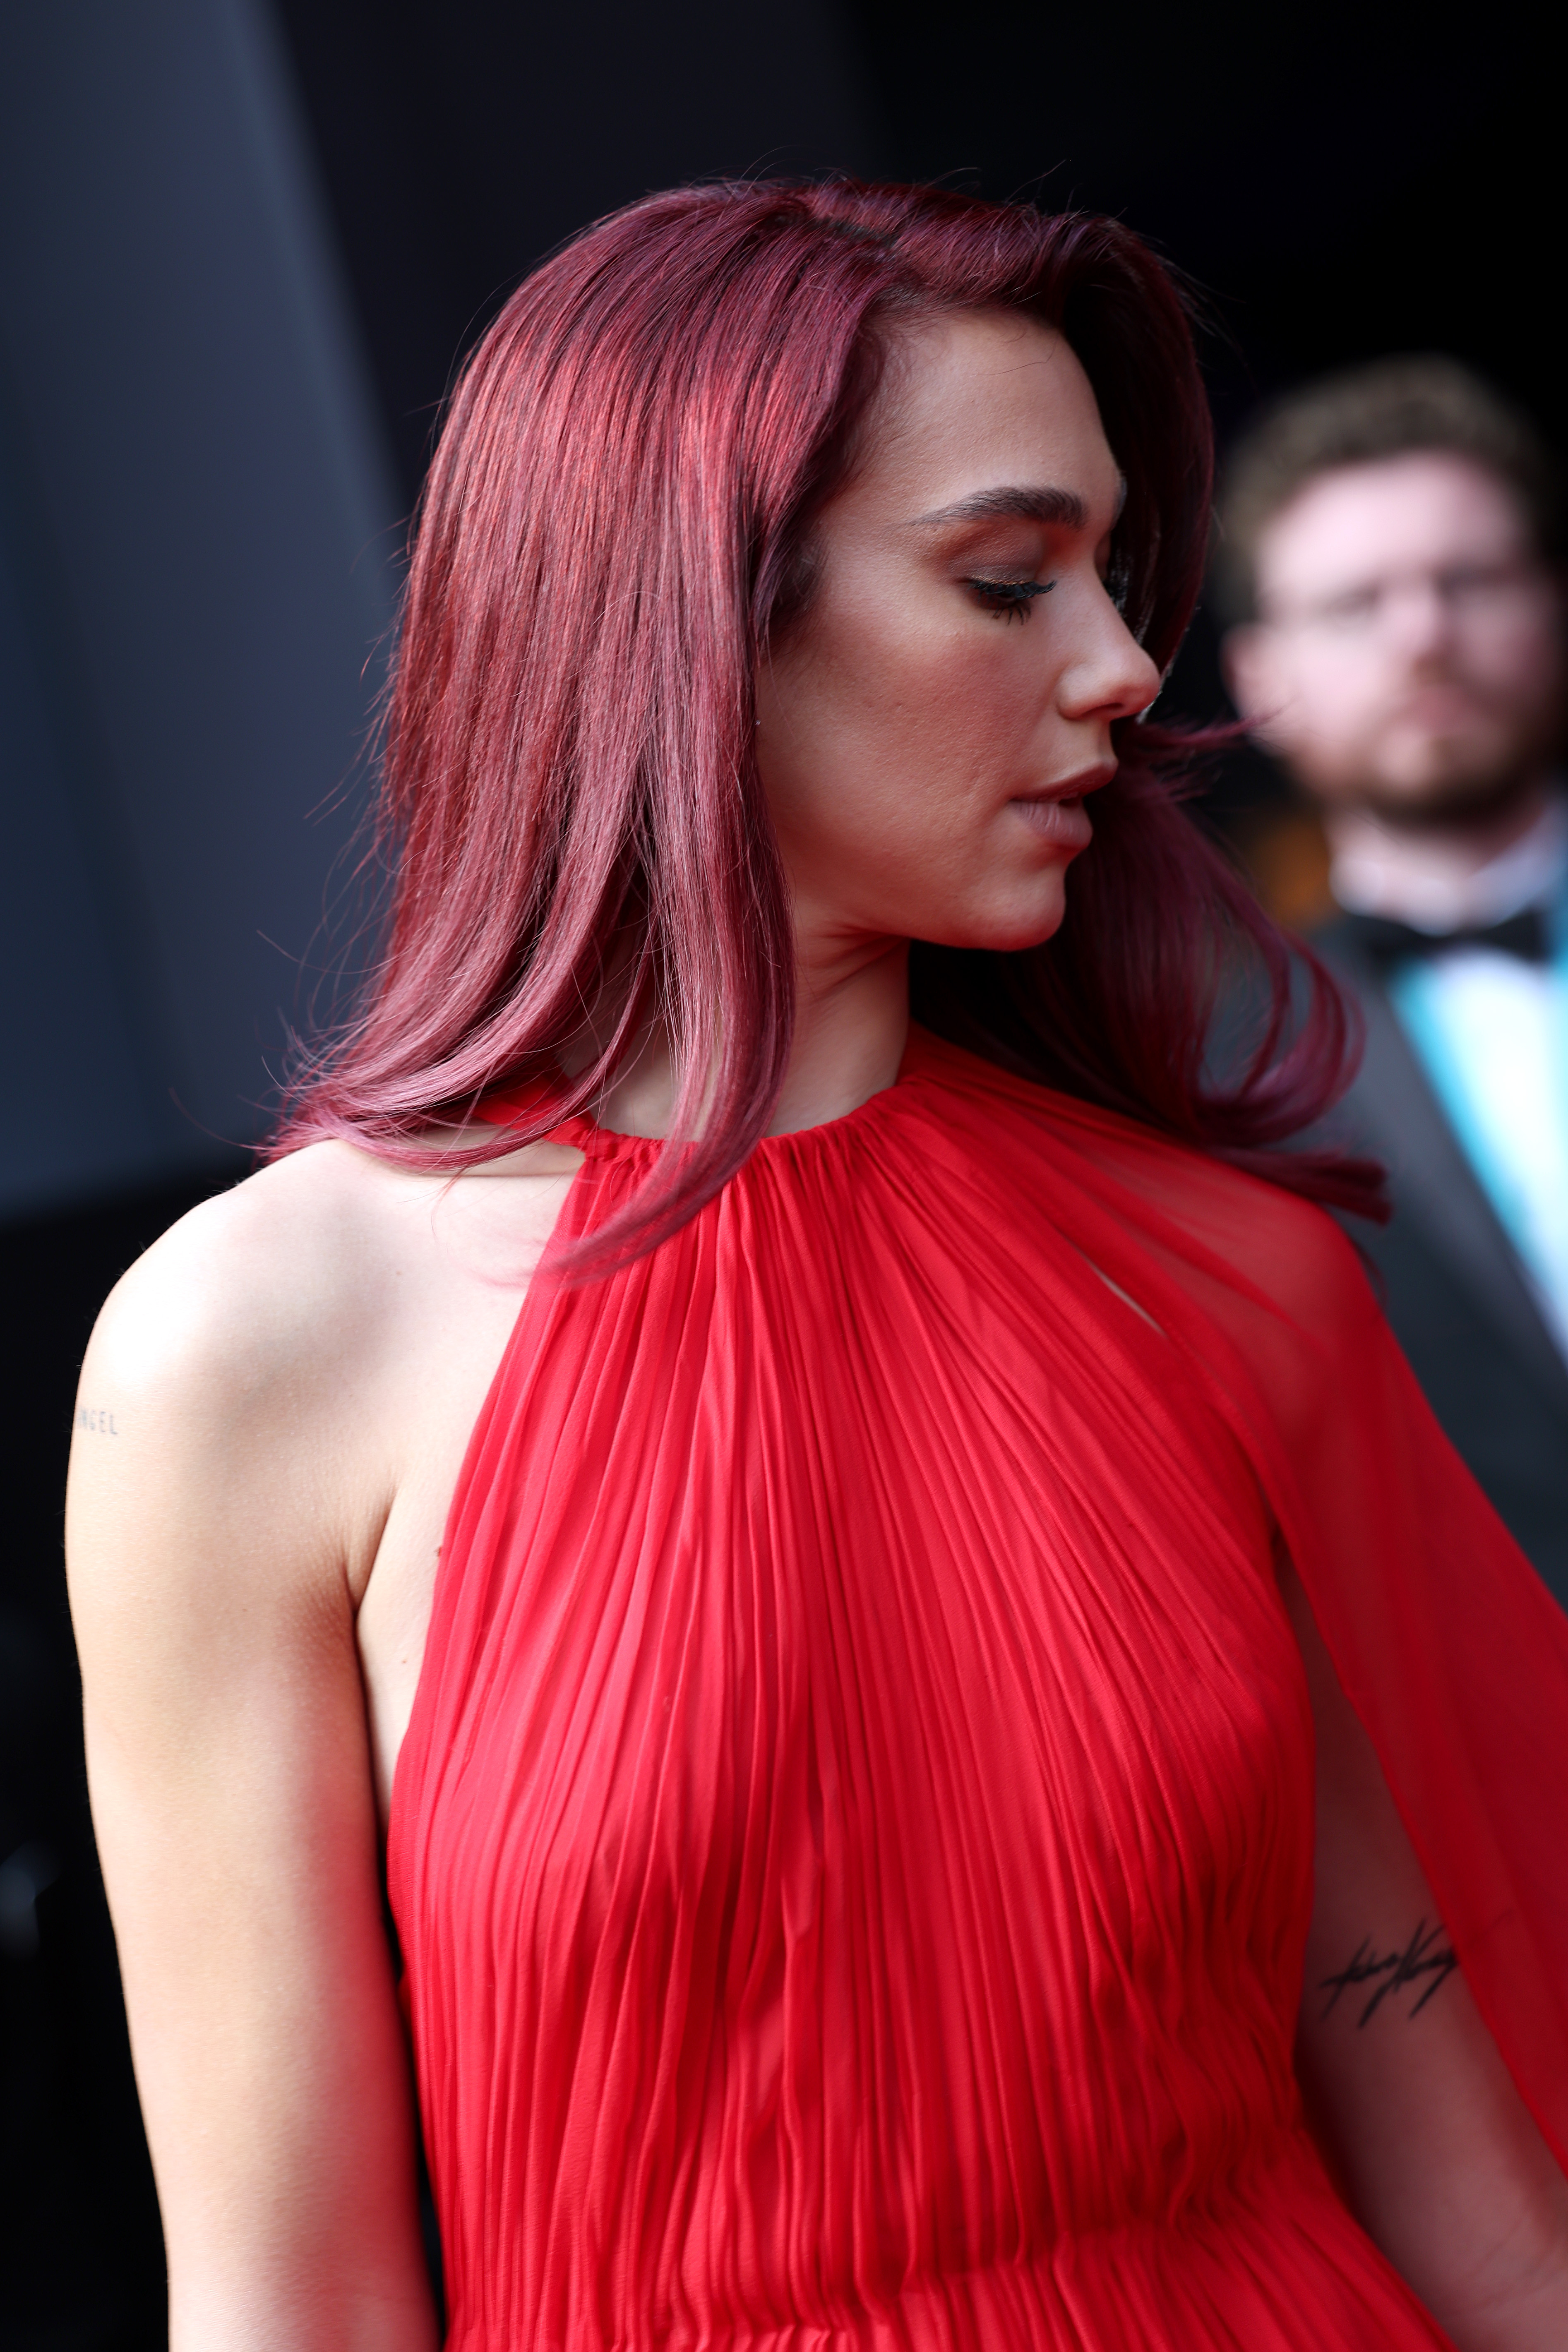 The stunner showed off her new red locks